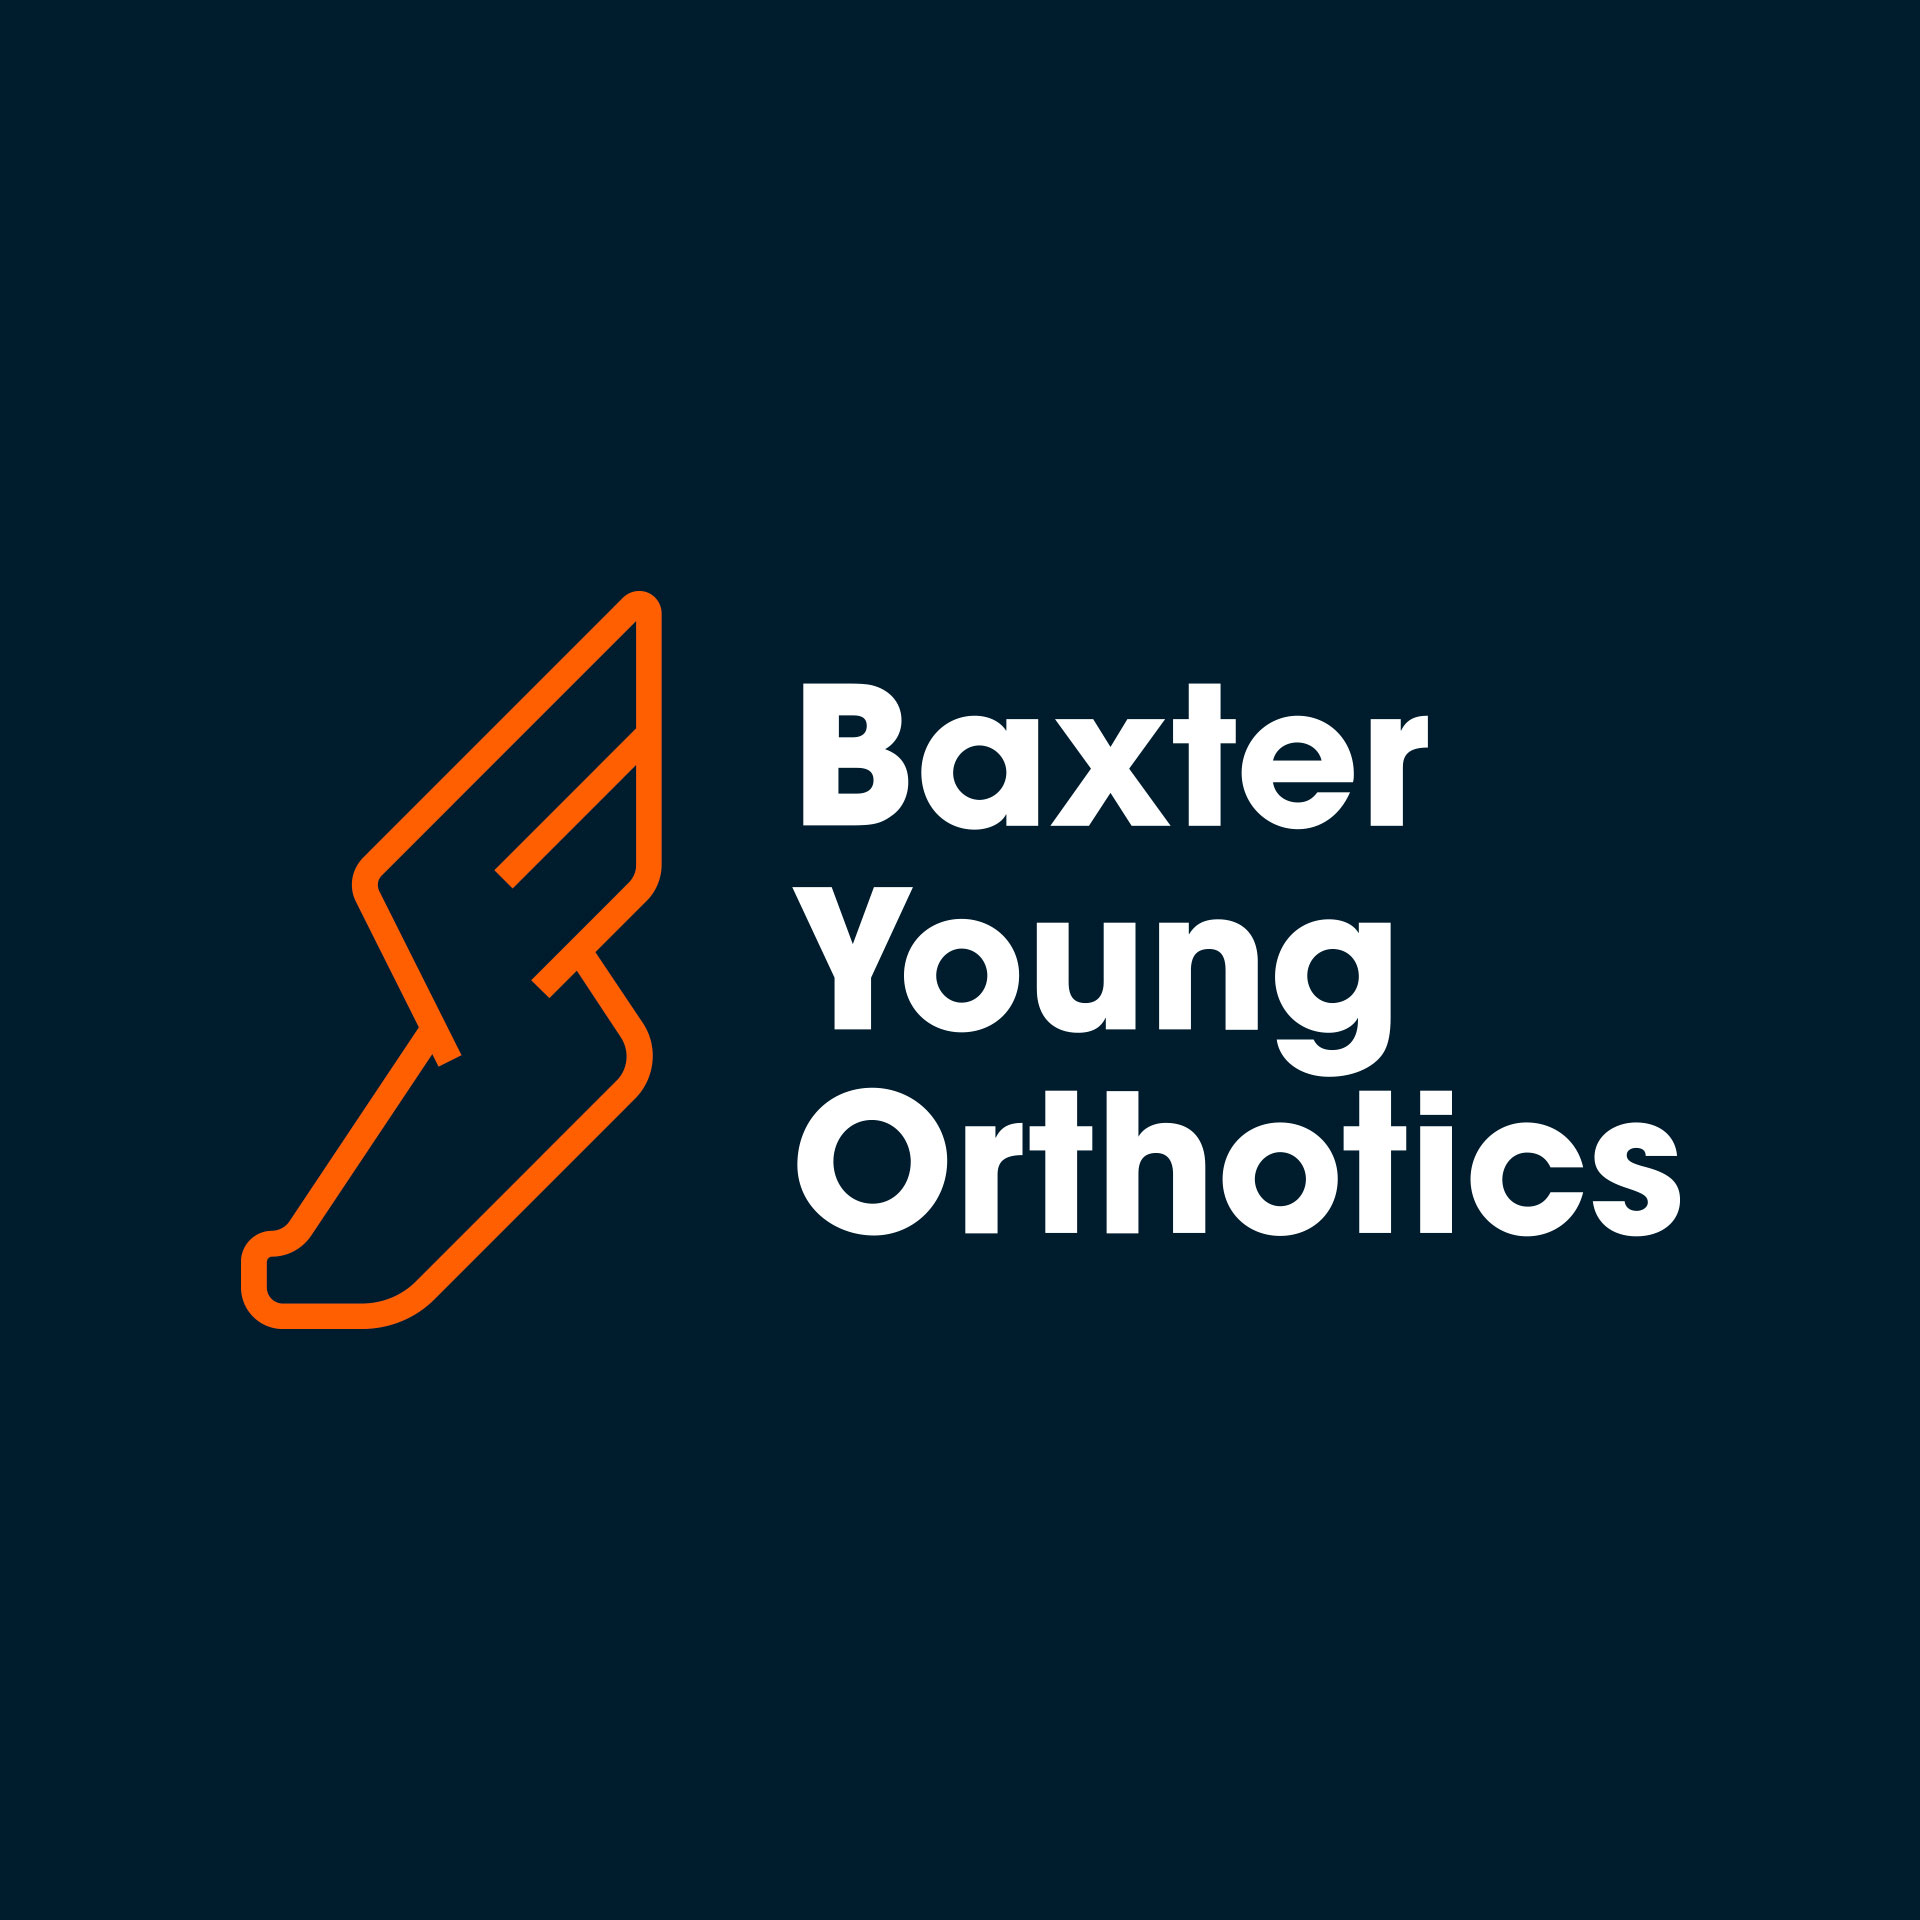 Baxter Young Orthotics Branding and Website Design by Okto Design Studio Newport Cardiff